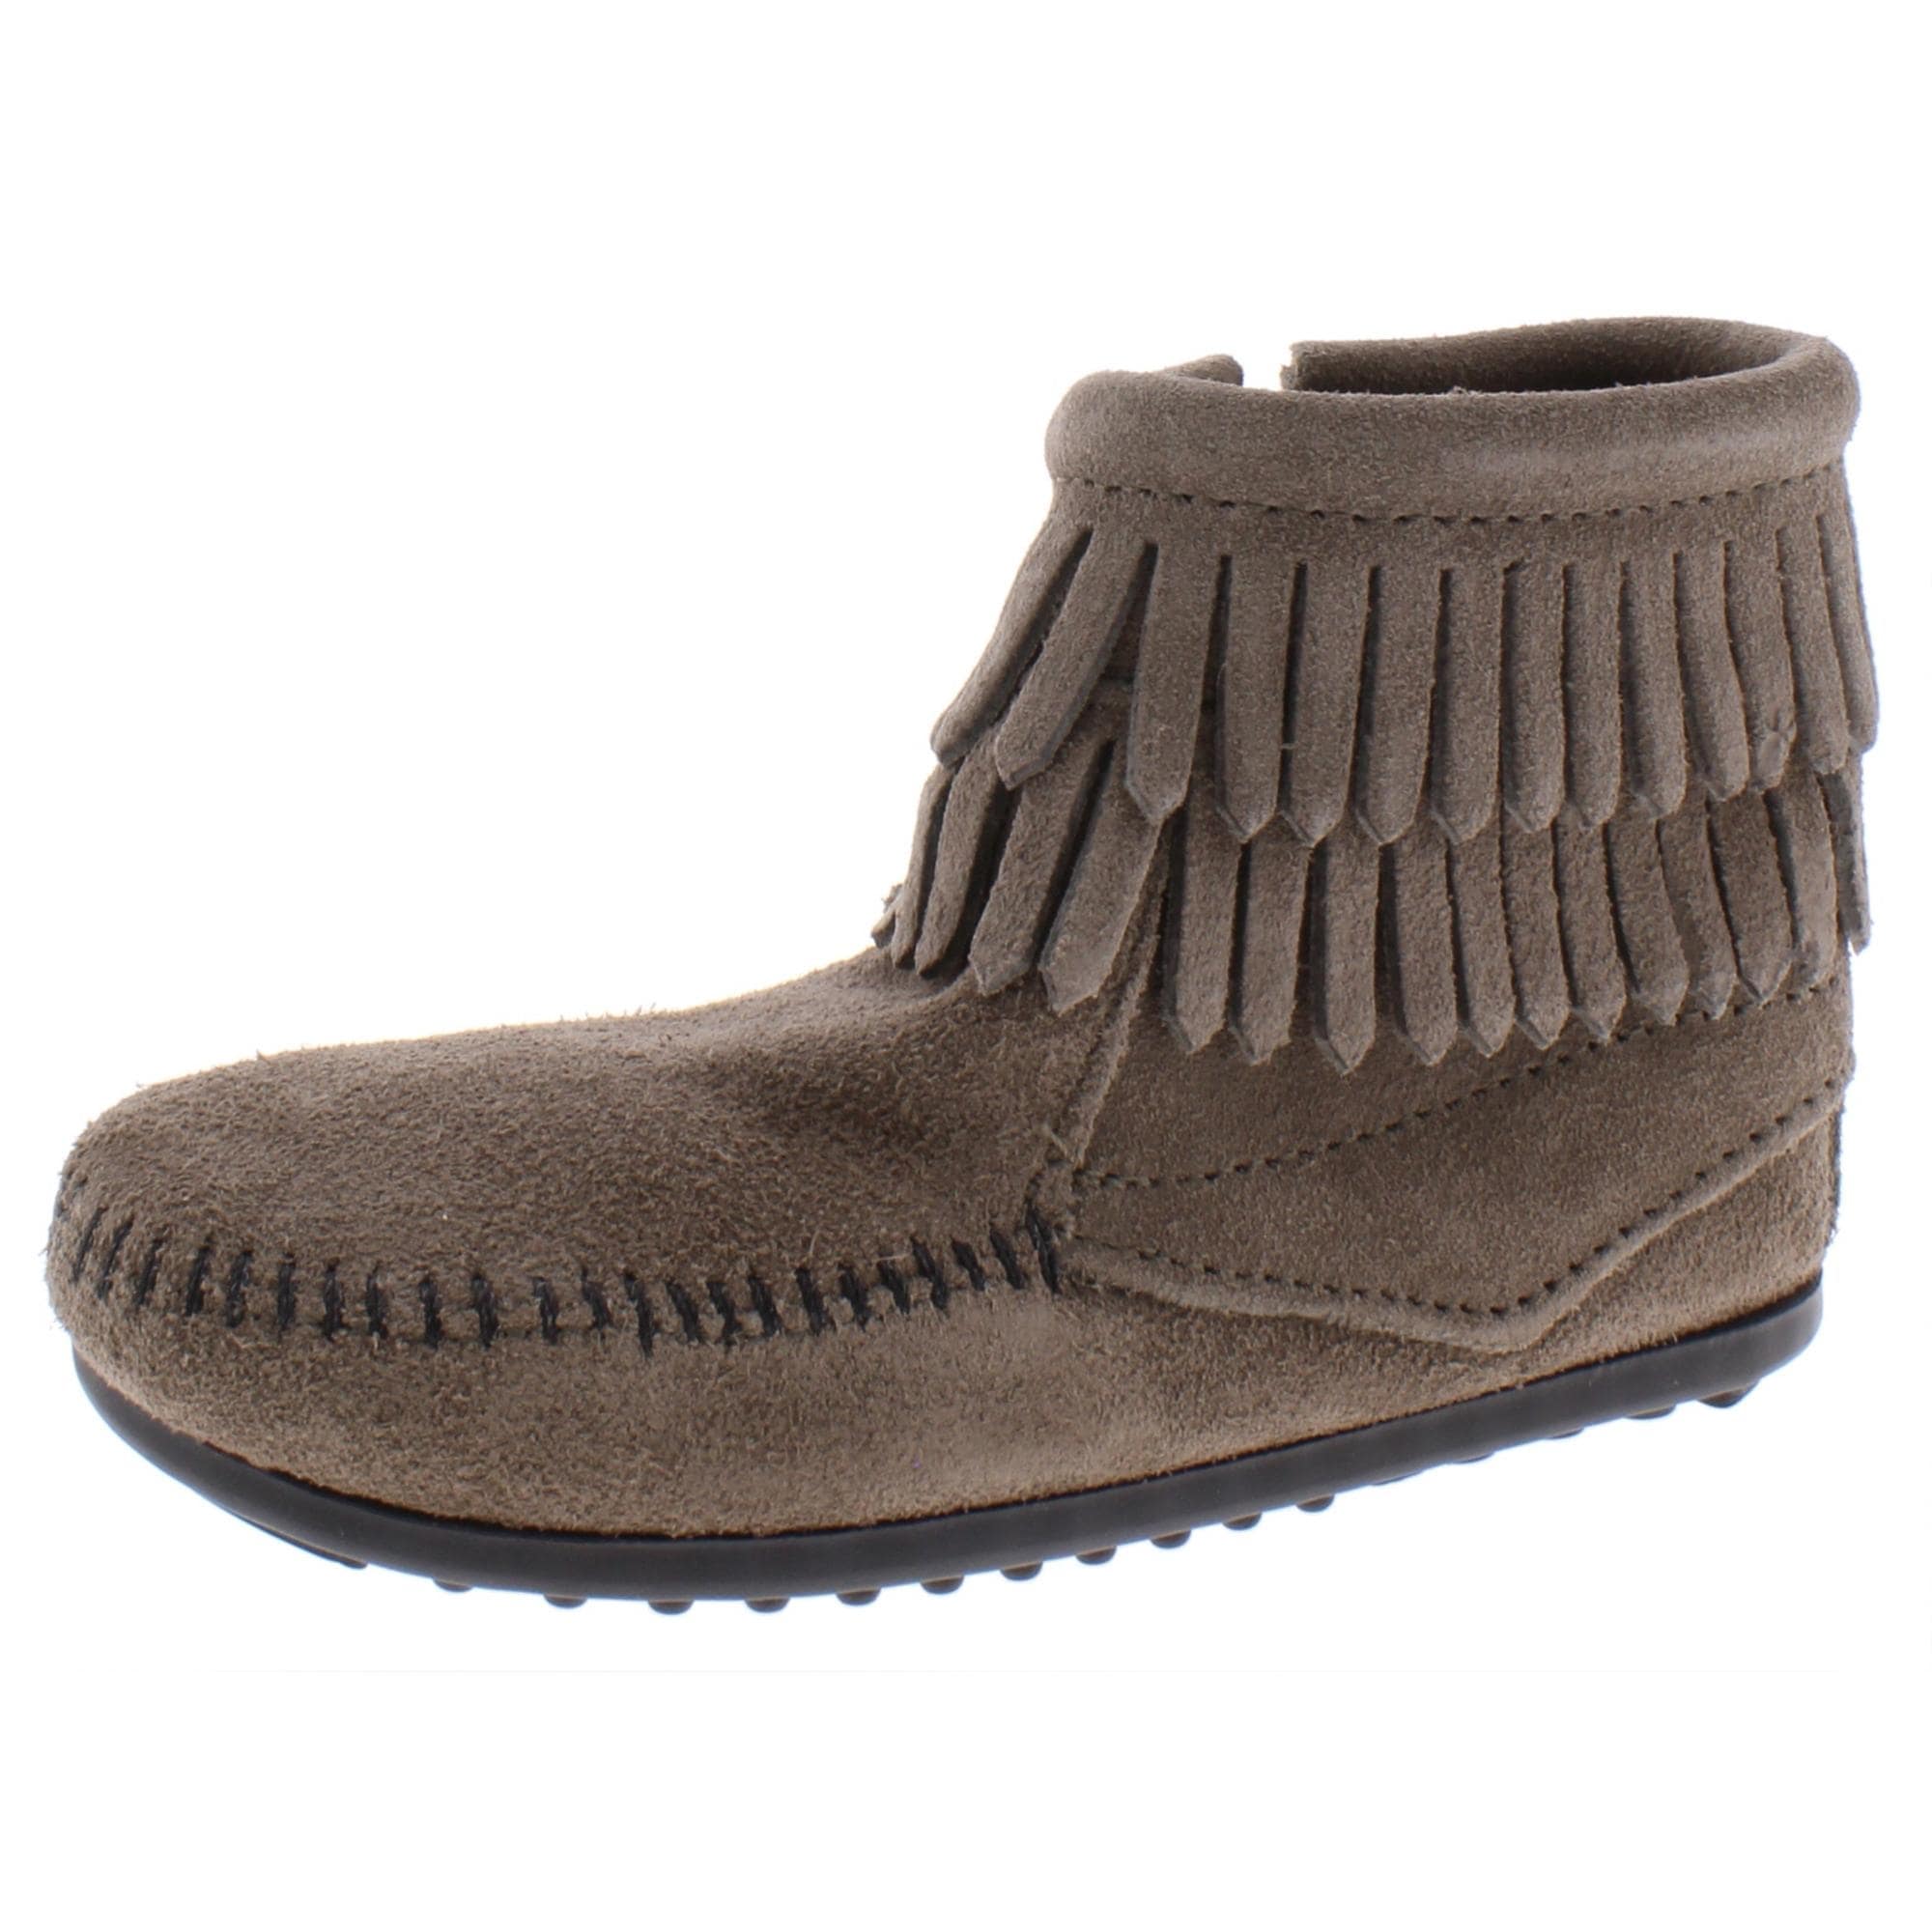 moccasin type boots